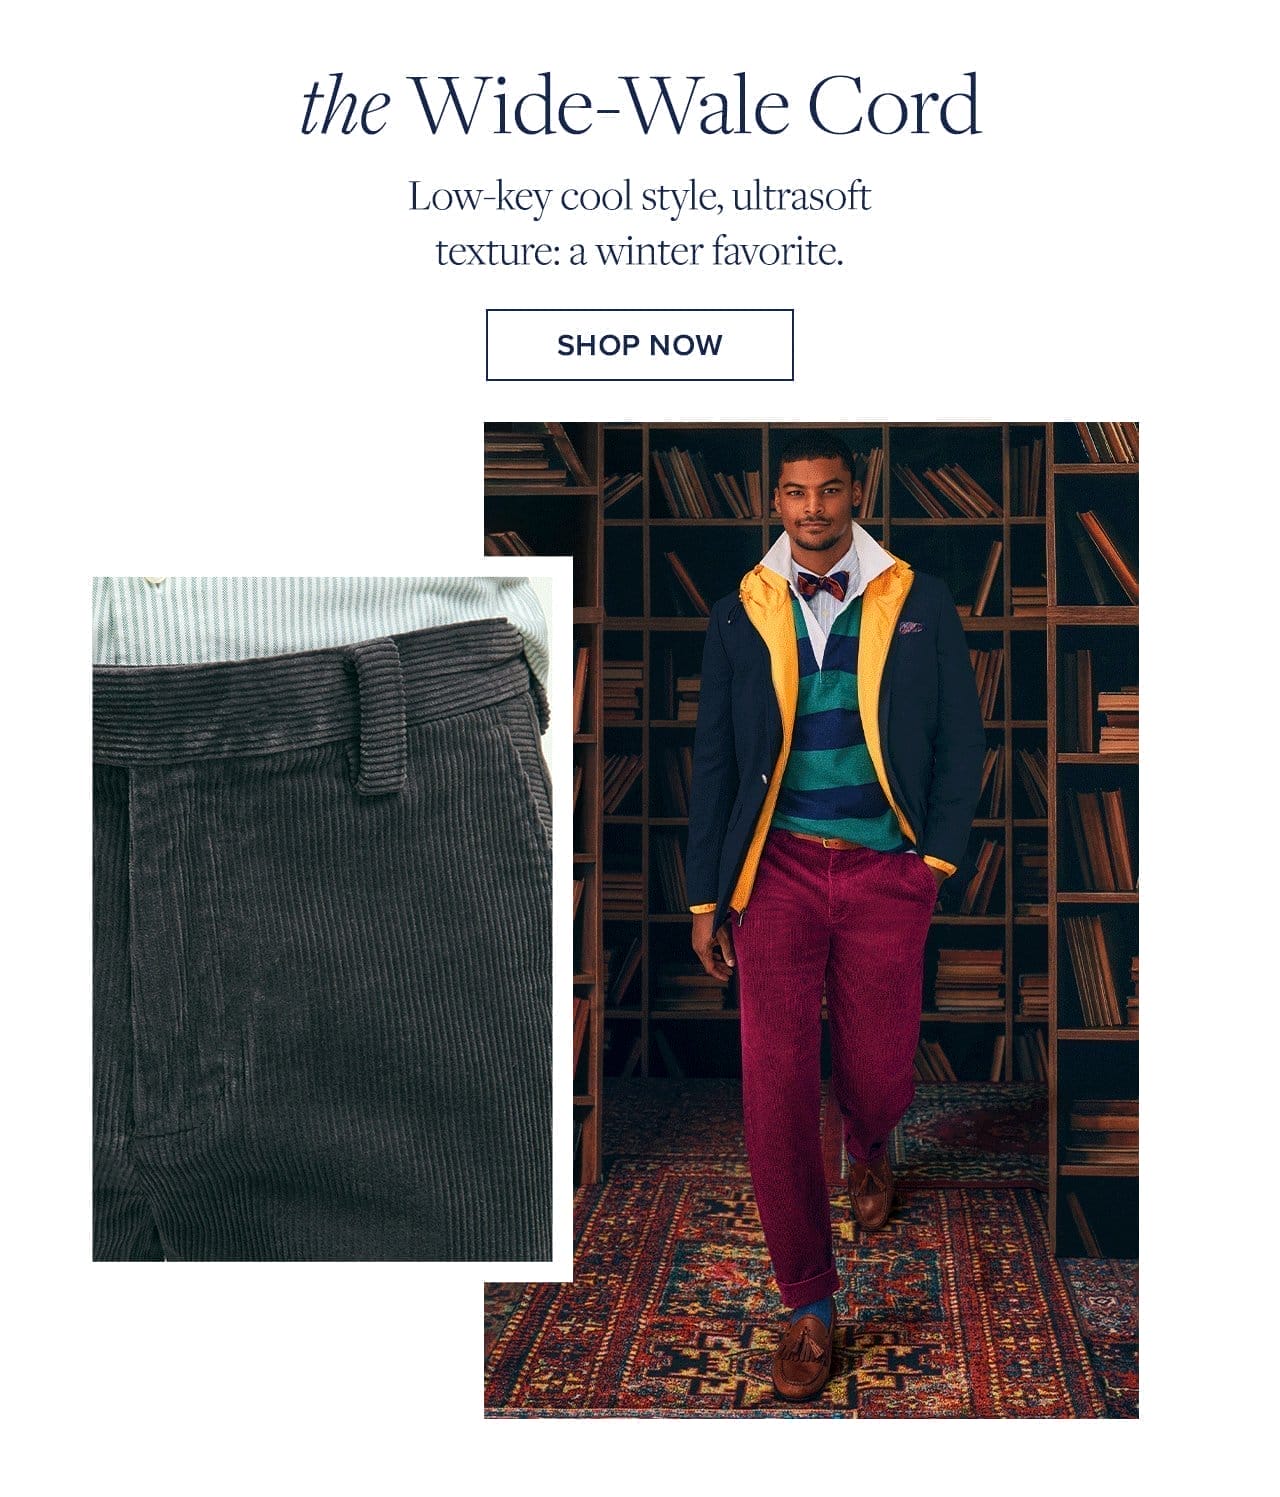 the Wide-Wale Cord Low-key cool style, ultrasoft texture: a winter favorite. Shop Now